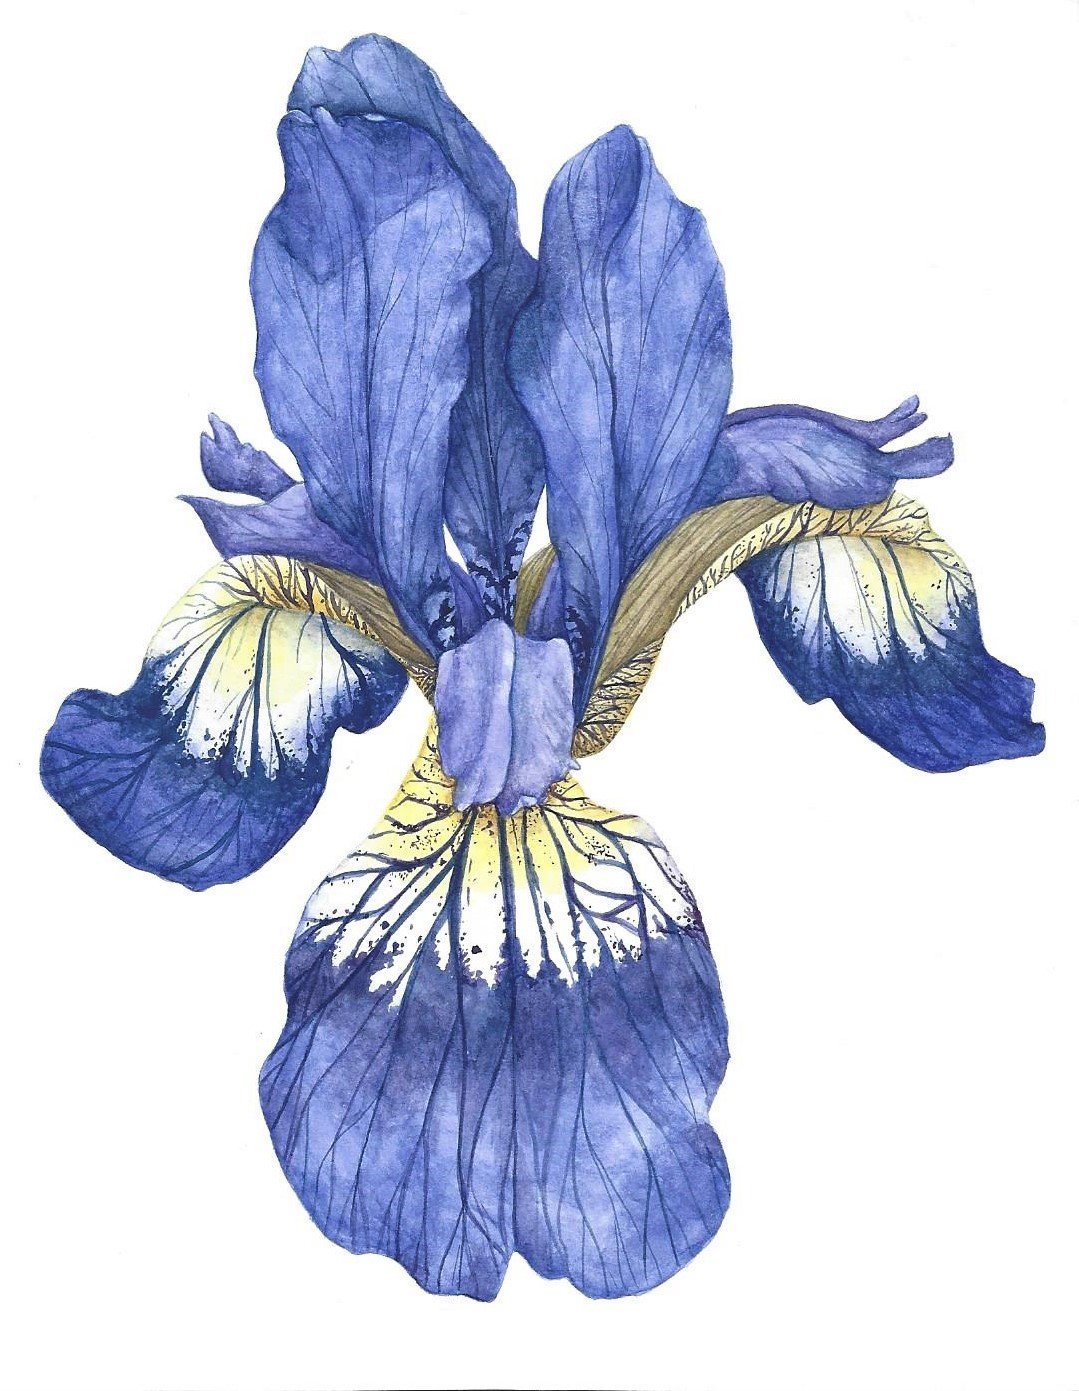 Hand drawn illustration of an orchid